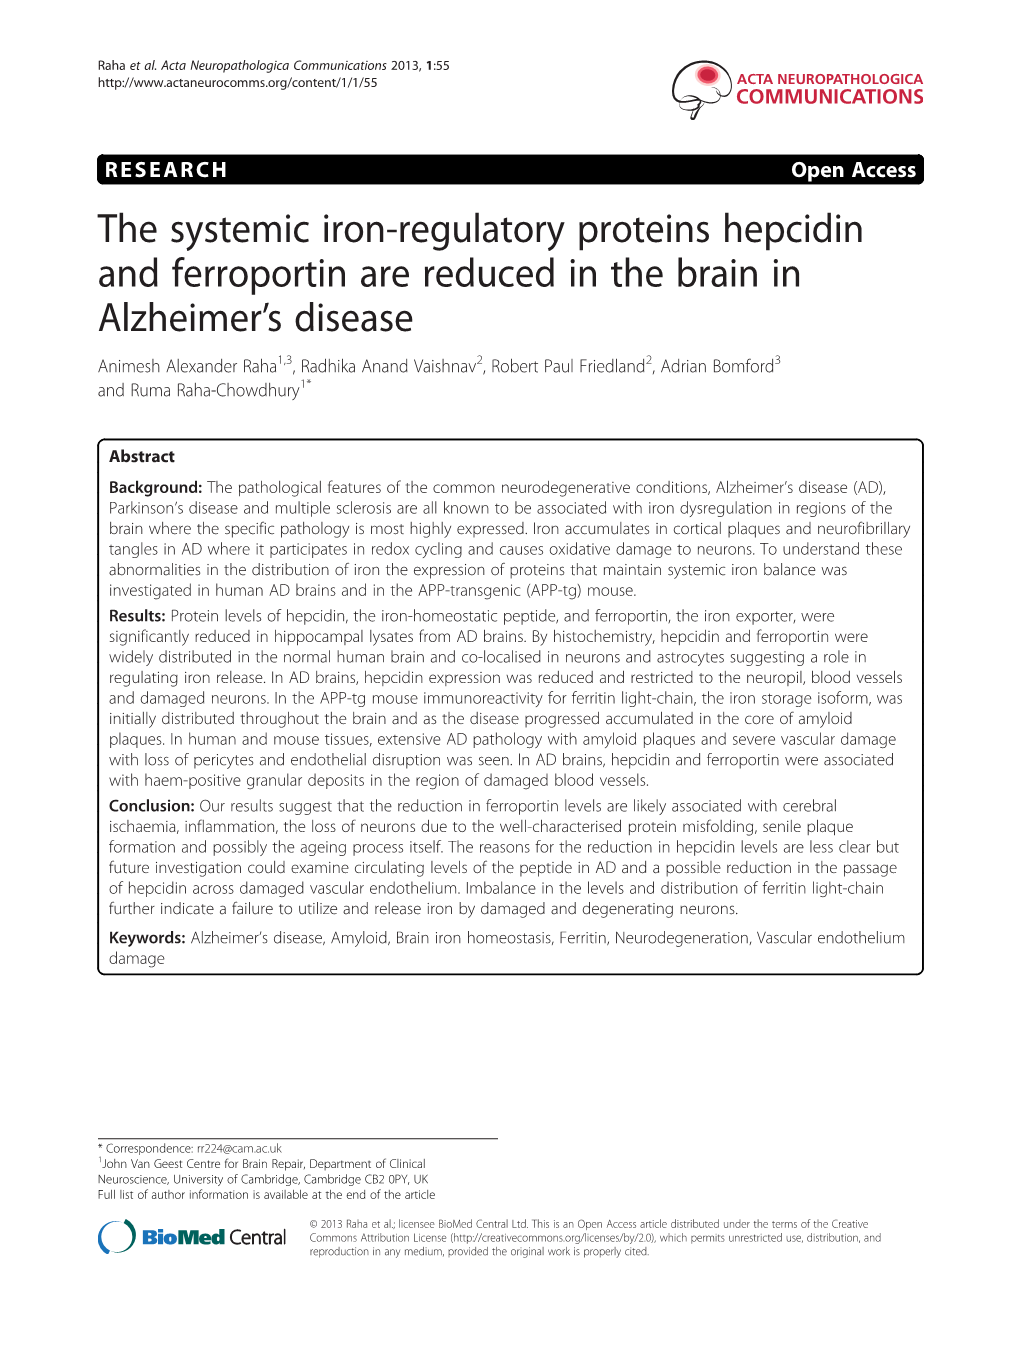 The Systemic Iron-Regulatory Proteins Hepcidin and Ferroportin Are Reduced in the Brain in Alzheimer's Disease